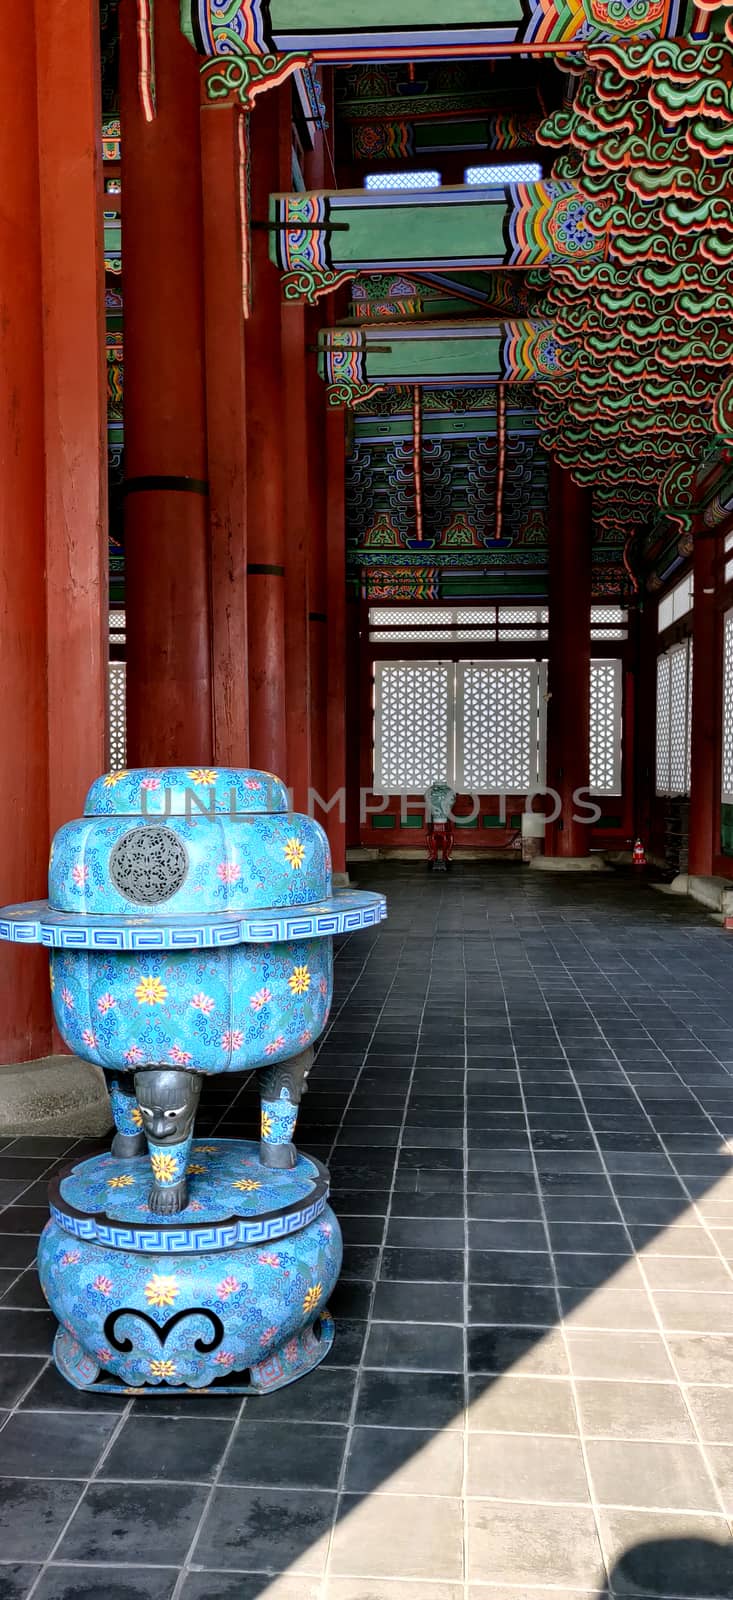 Objects in the Interiors of Royal palace, Gyeongbokgung, in Seoul, Korea by mshivangi92